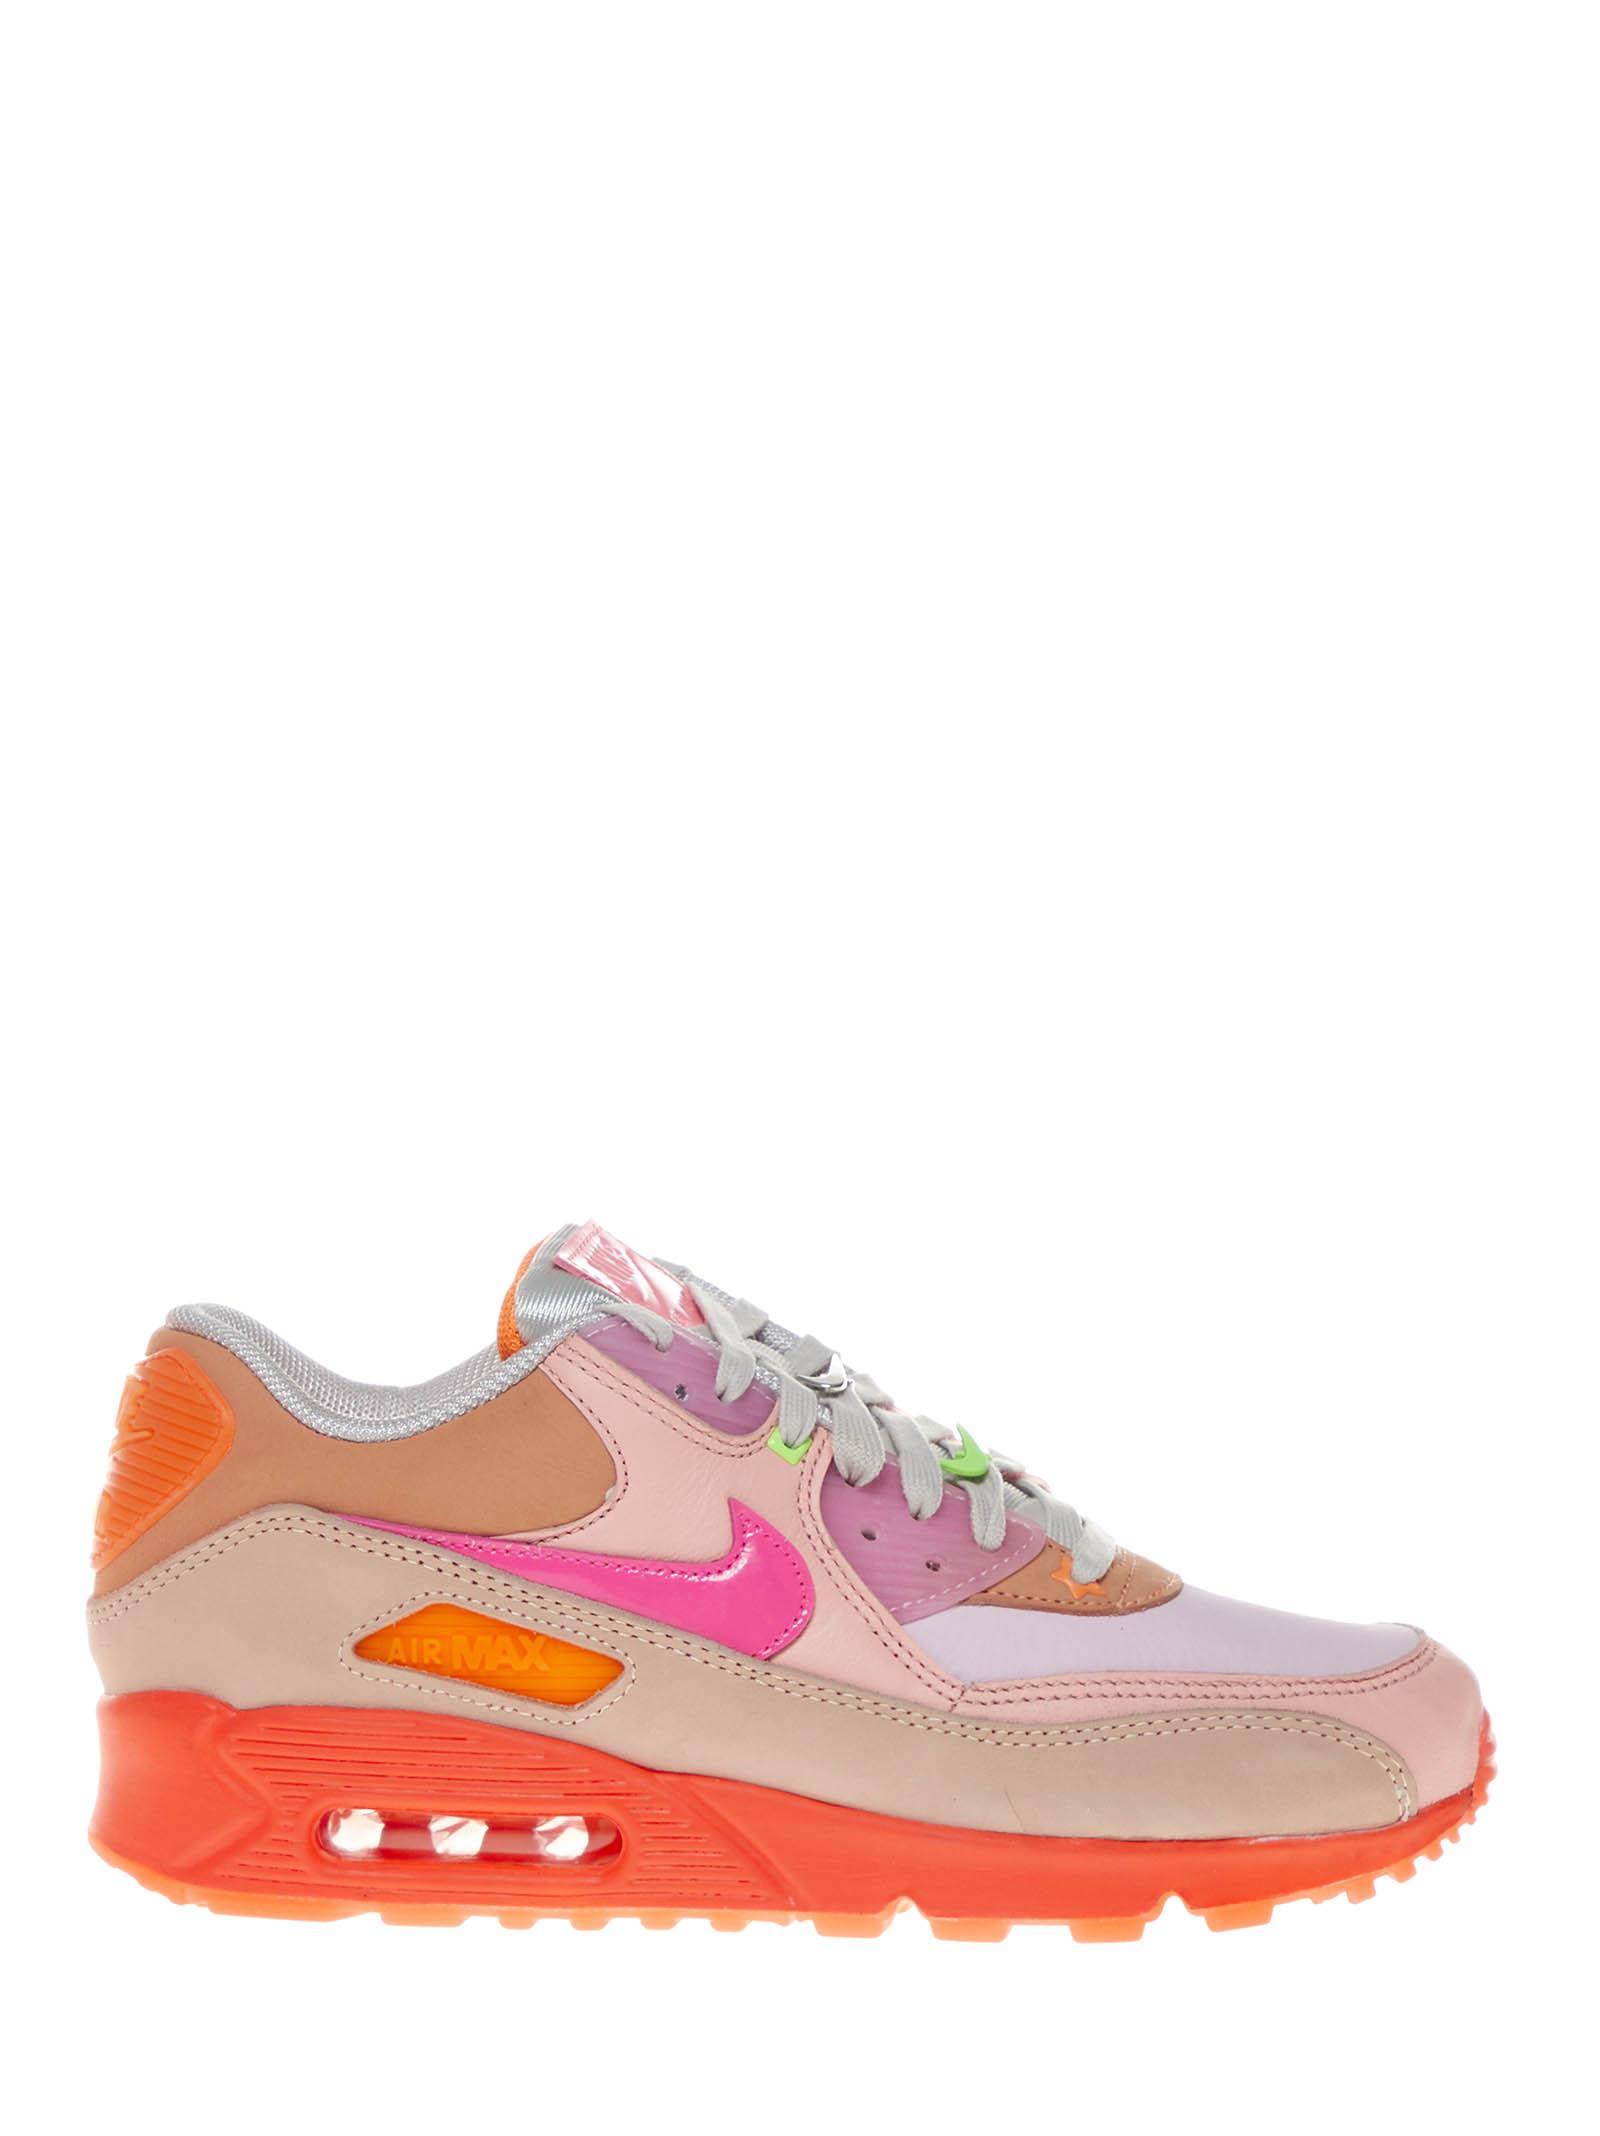 Nike Leather Pink And Orange Air Max 90 Sneakers With Layered Design And  Integrated Air Technology. | Lyst